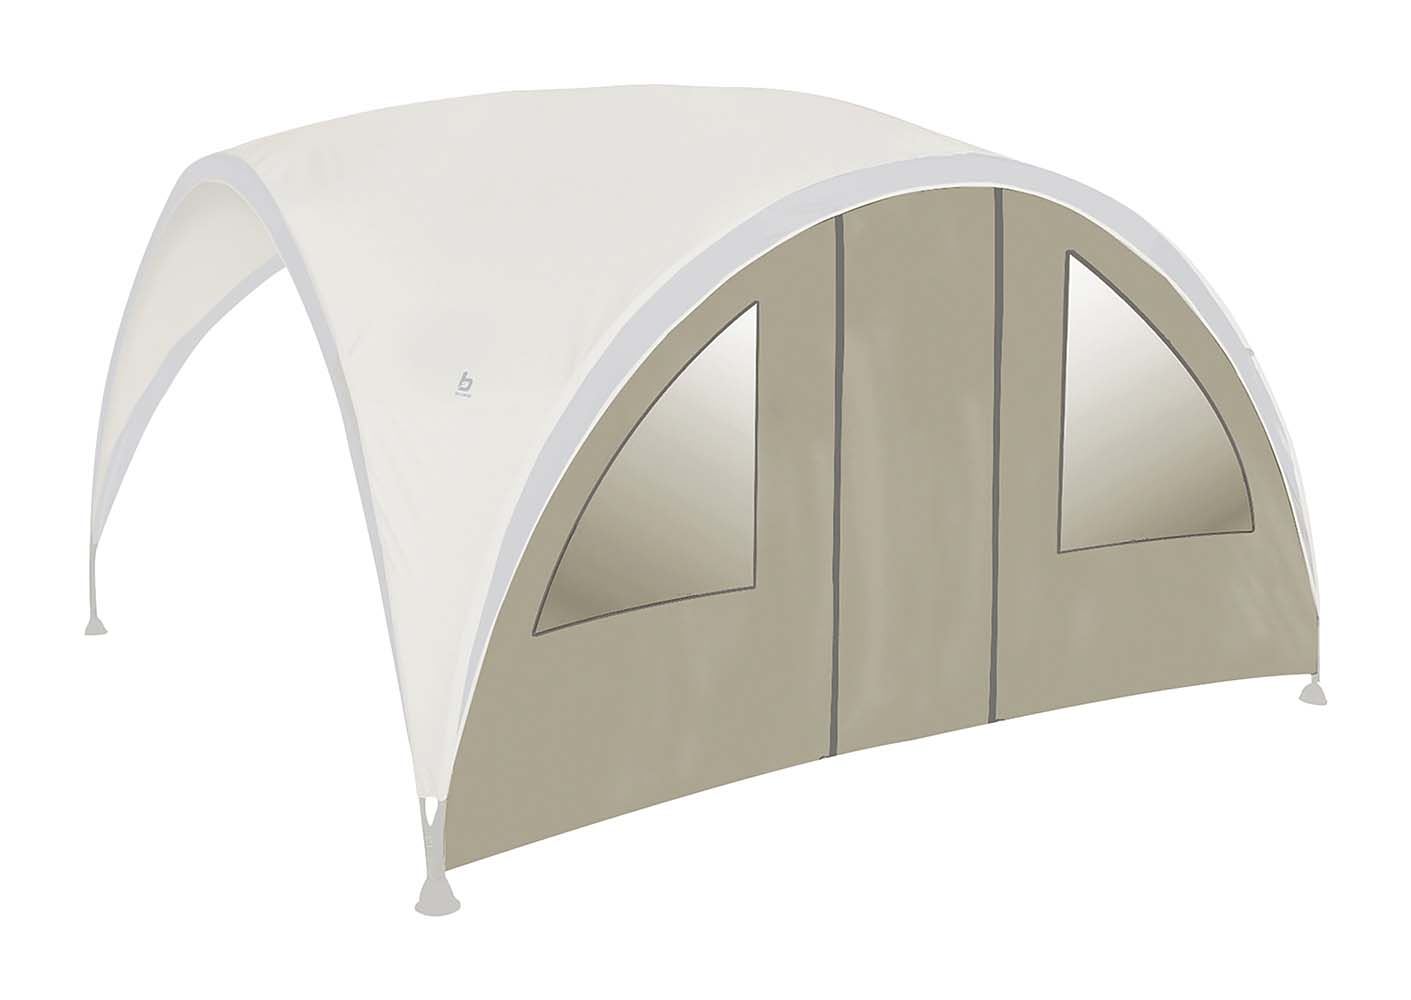 4472221 Bo-Camp - Sidewall - Party Shelter - Polyester - Medium - With door and window